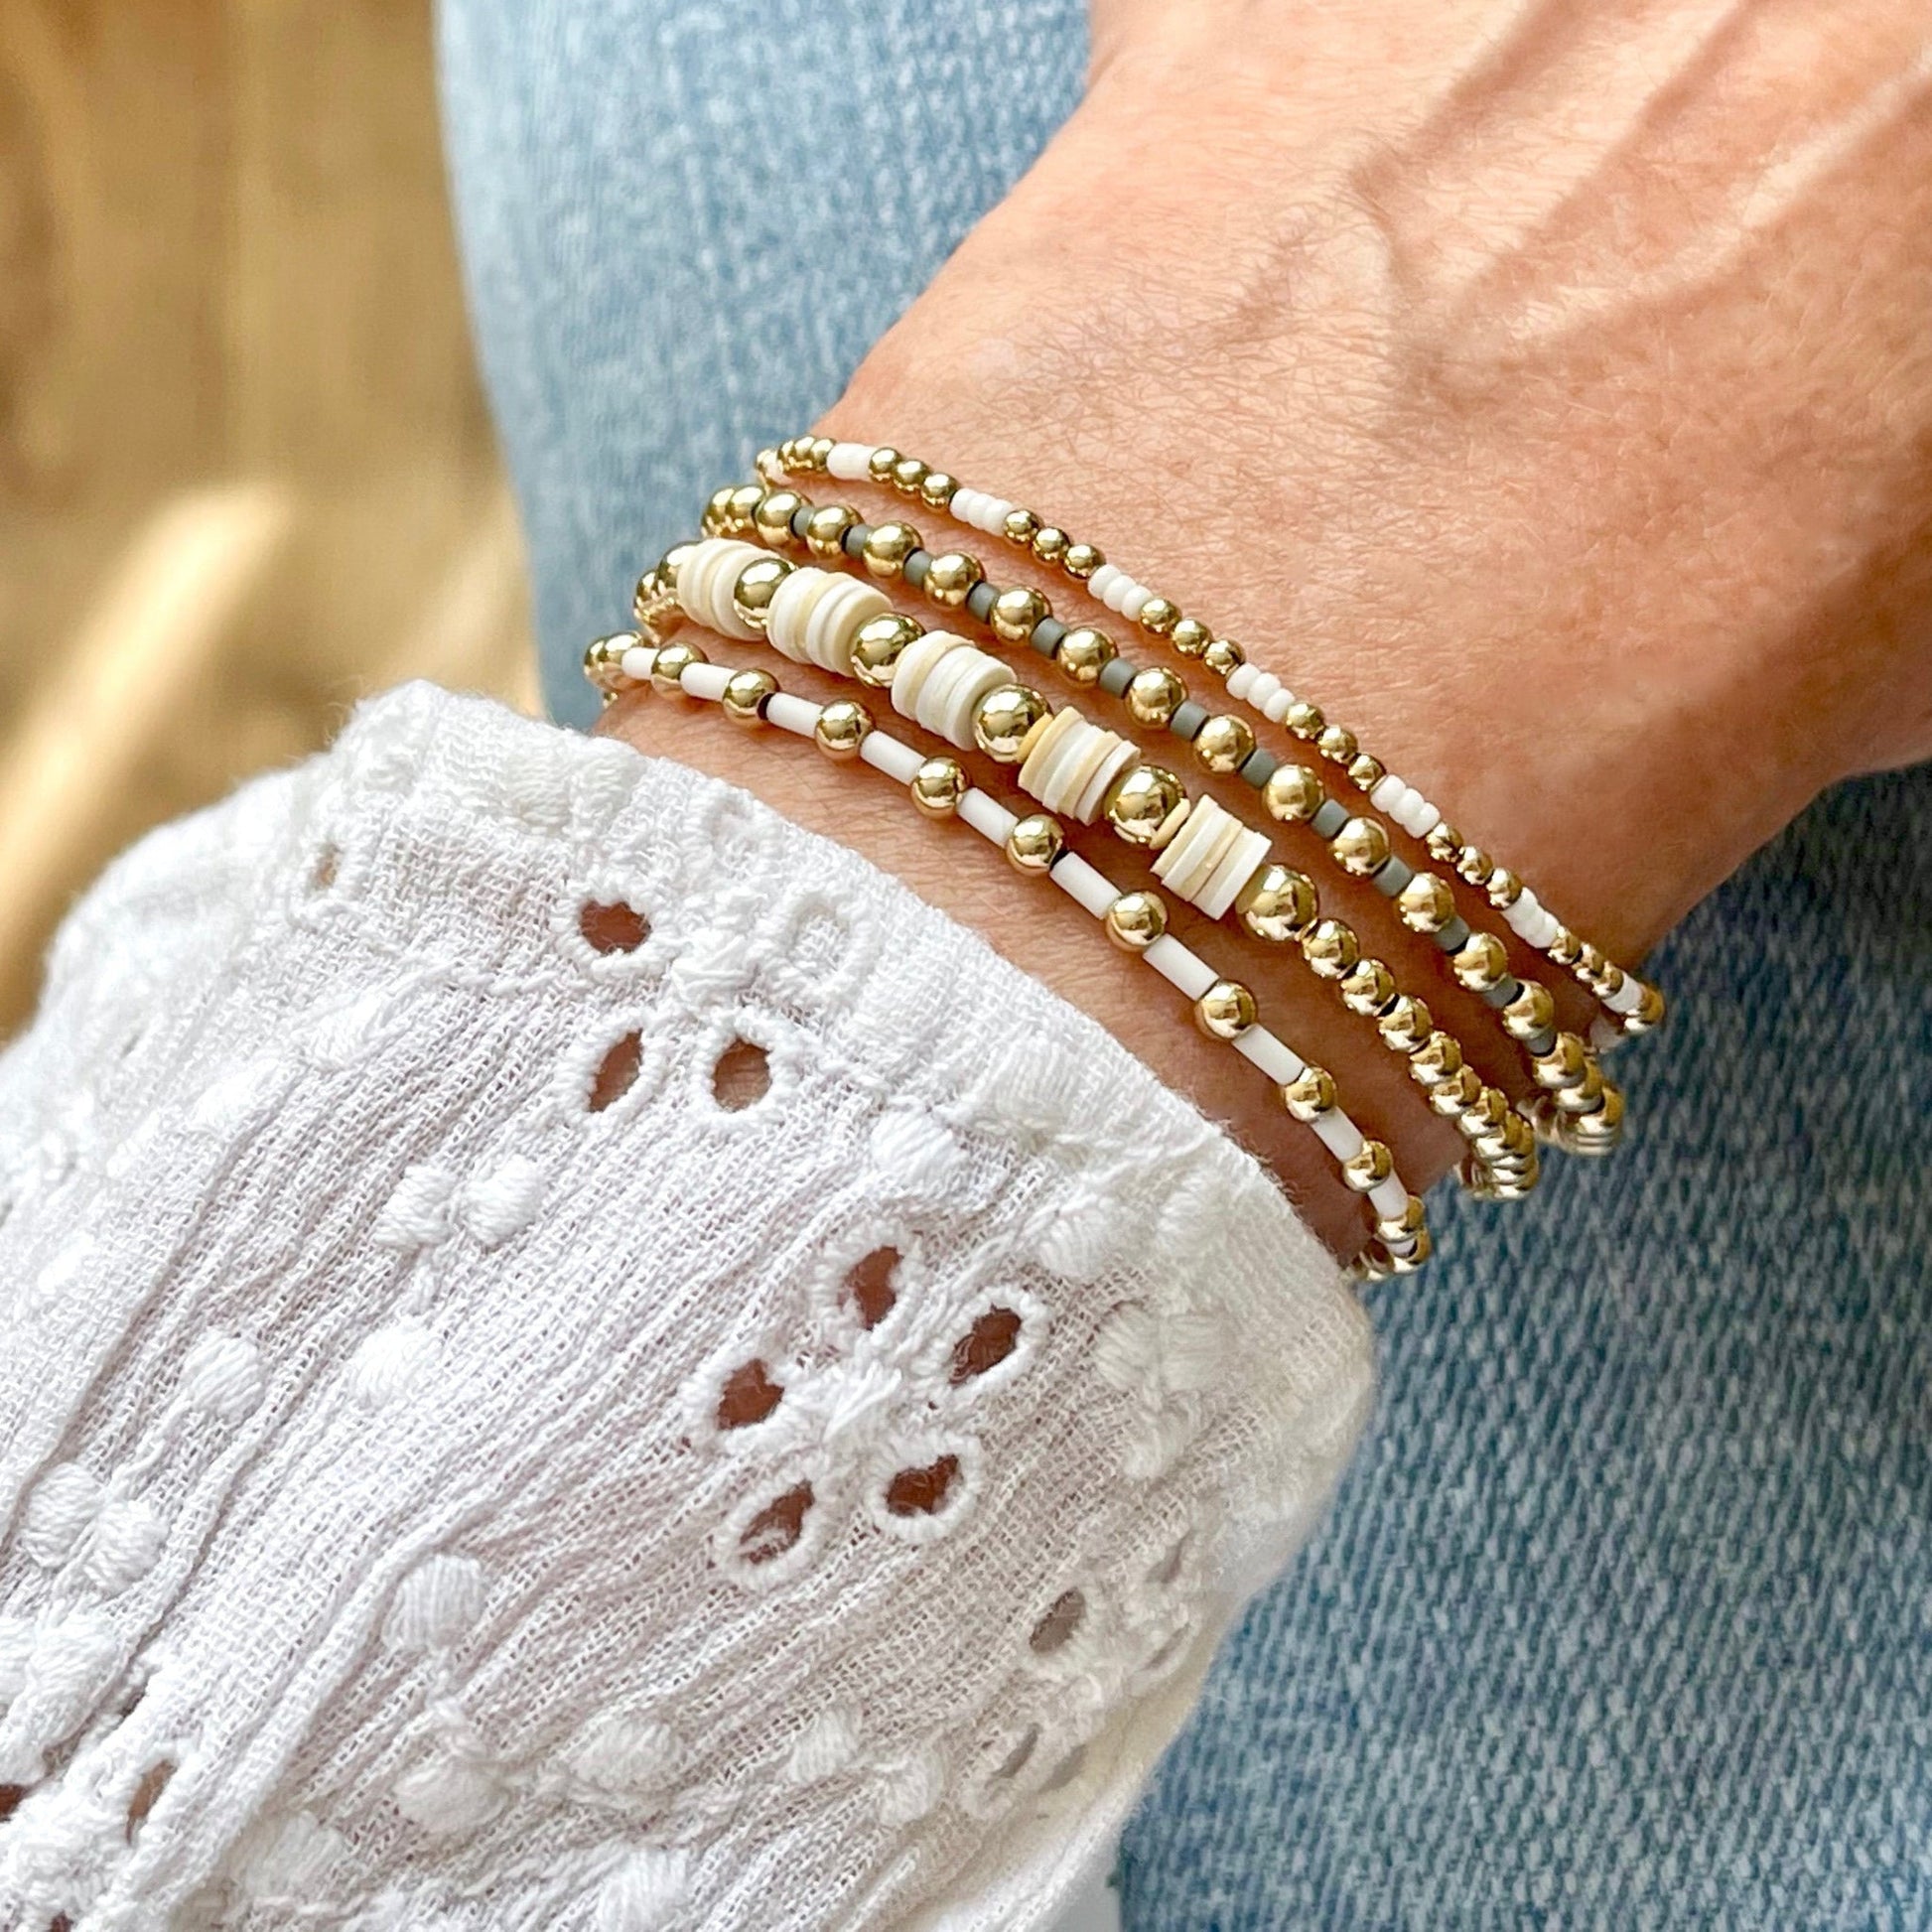 Heishi bracelet and gold bead stretch bracelets with white and gray glass seed beads and 14k gold fill beads.